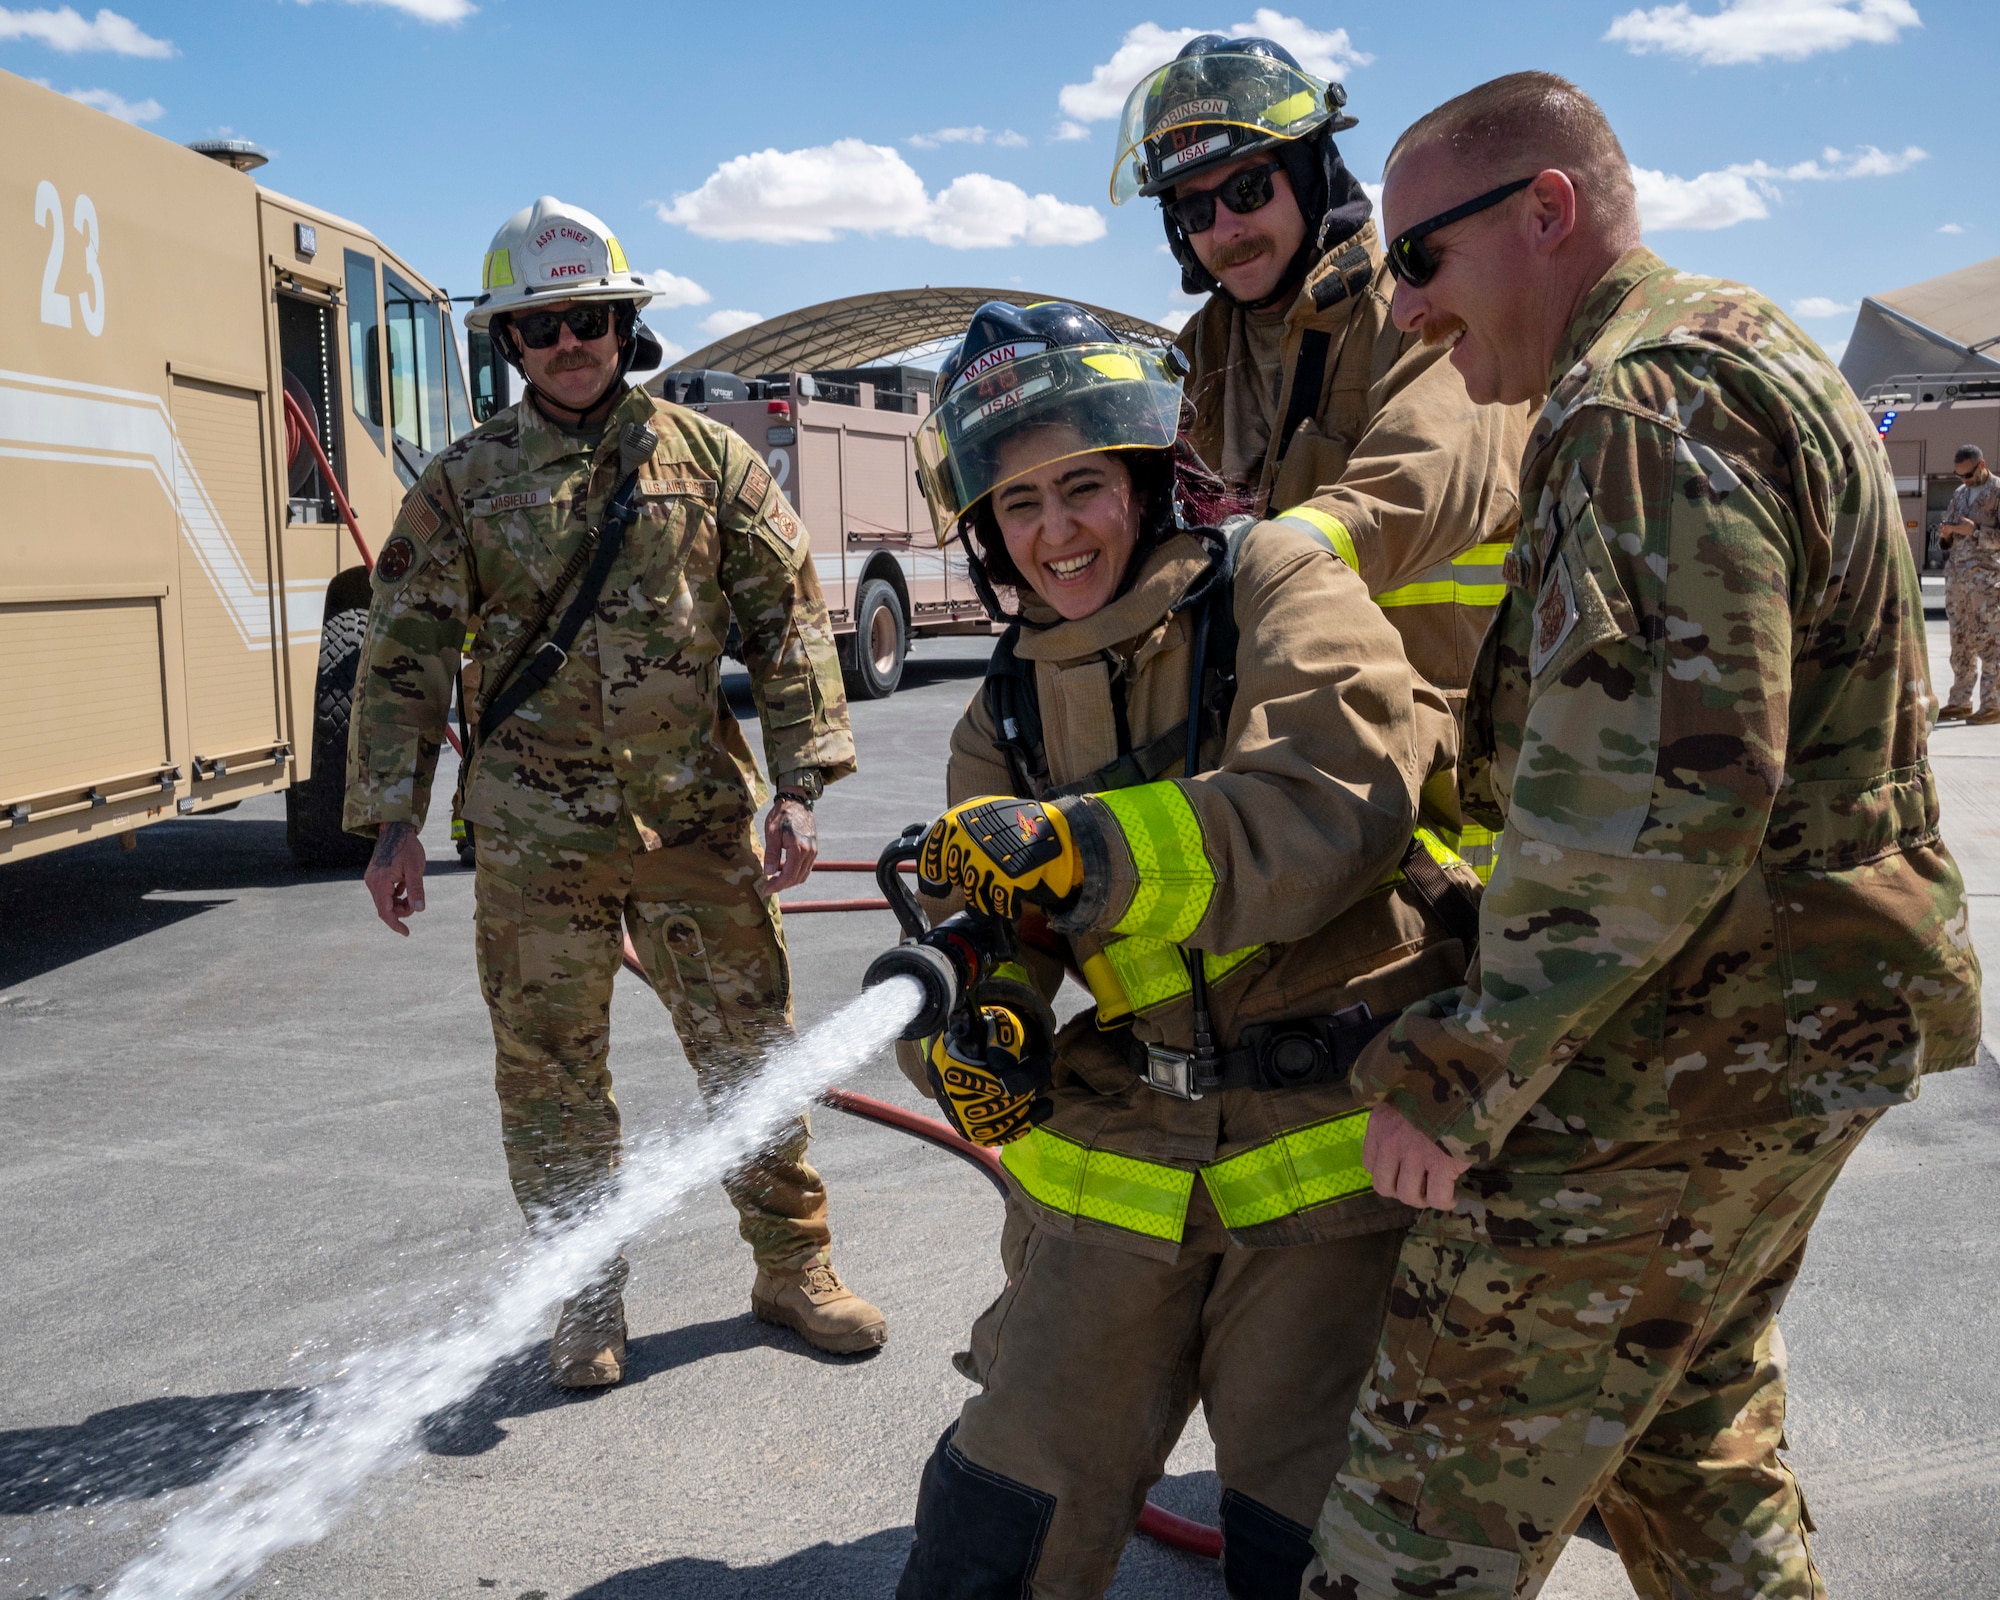 U.S. Air Force Firefighters from the 386th Expeditionary Civil Engineer Squadron help Mai Alsoukari, Al Qabas journalist, spray water from a firehose at Ali Al Salem Air Base, Kuwait, March 21, 2023.